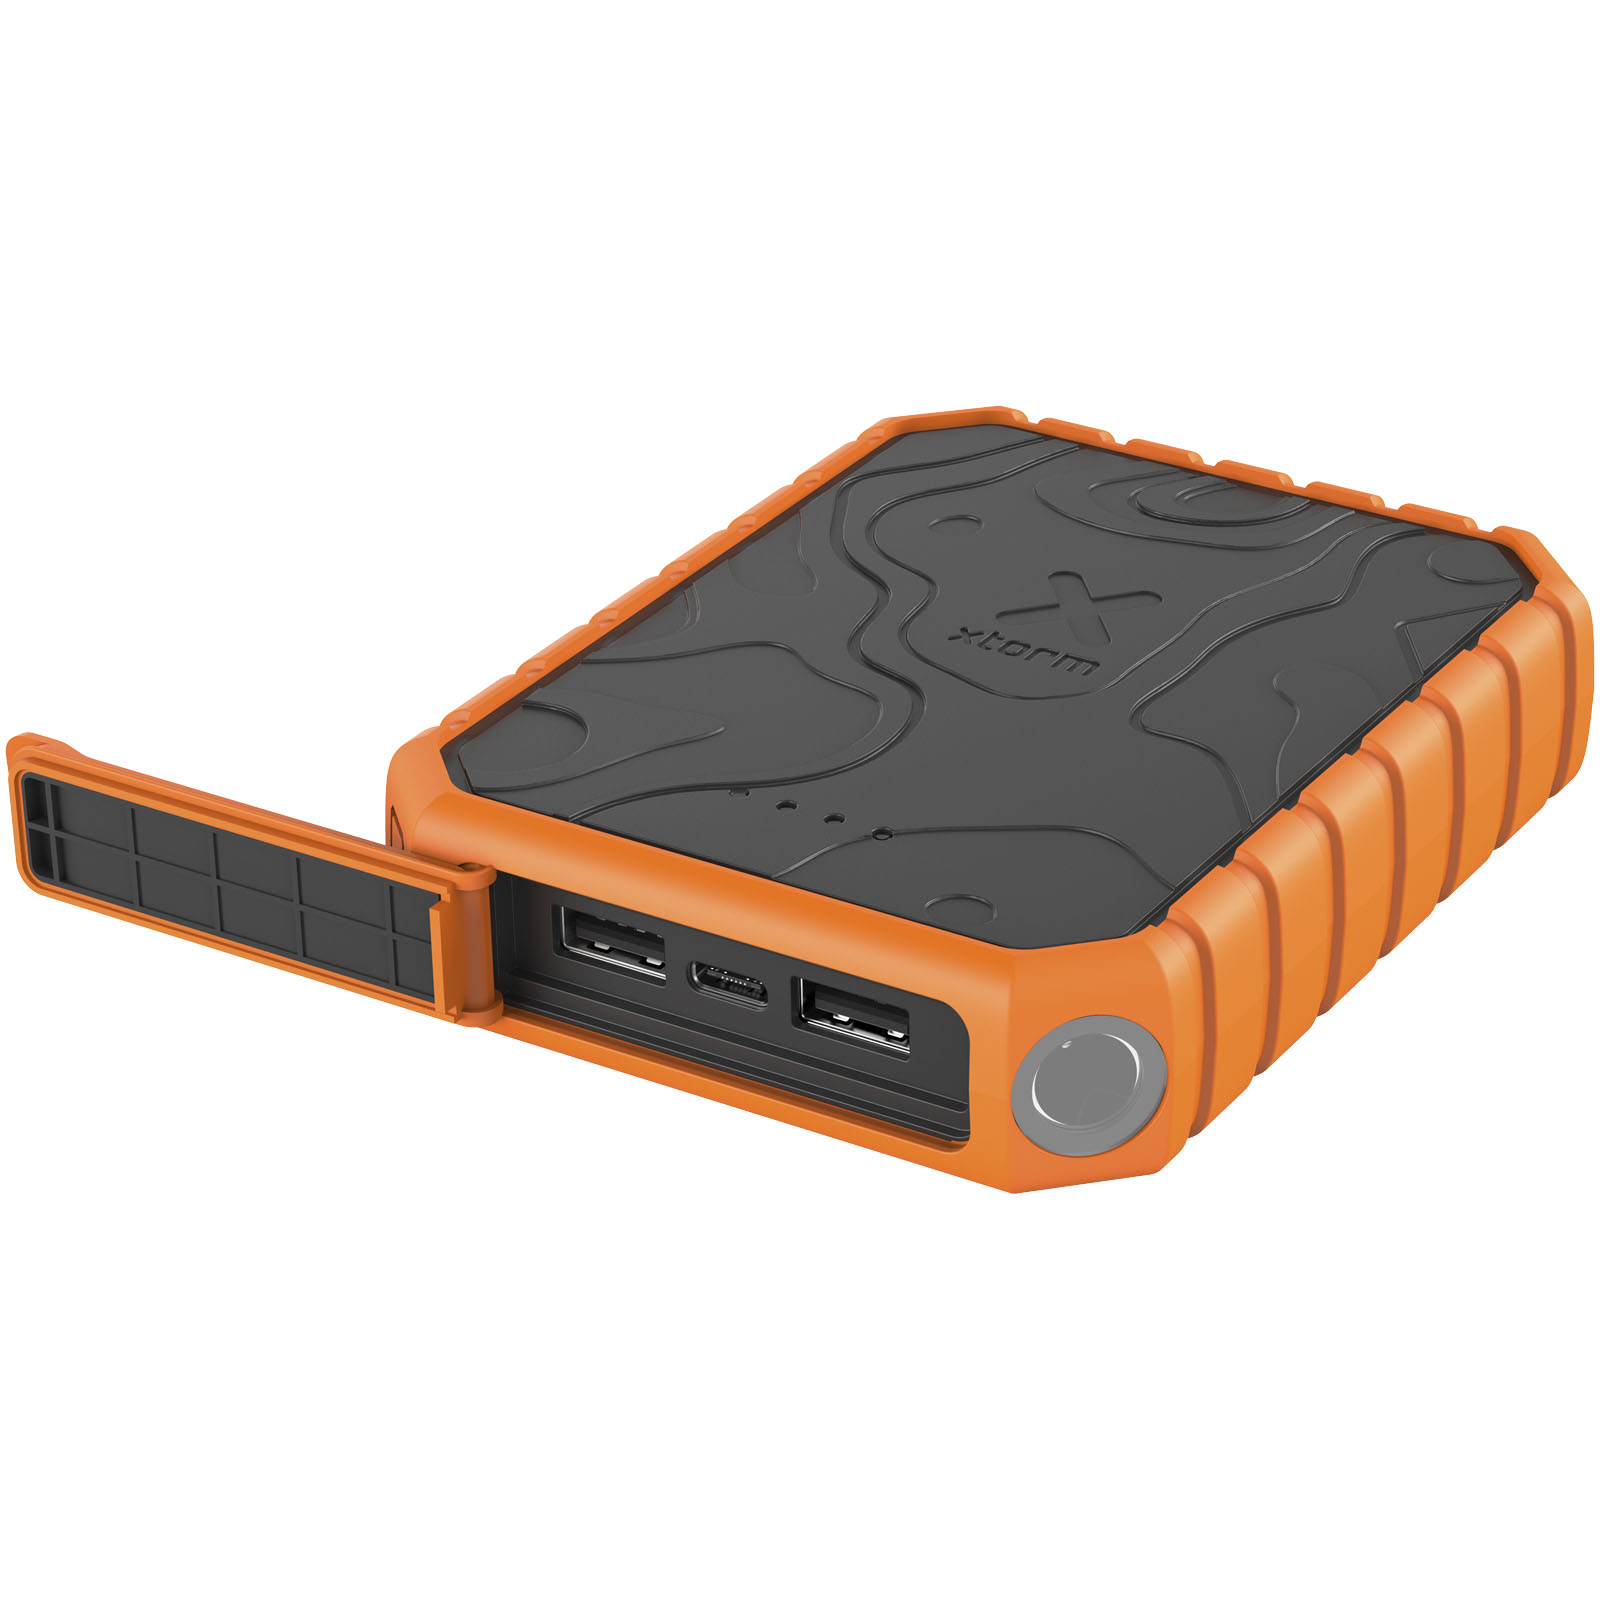 Advertising Powerbanks - Xtorm XR201 Xtreme 10.000 mAh 20W QC3.0 waterproof rugged power bank with torch - 4